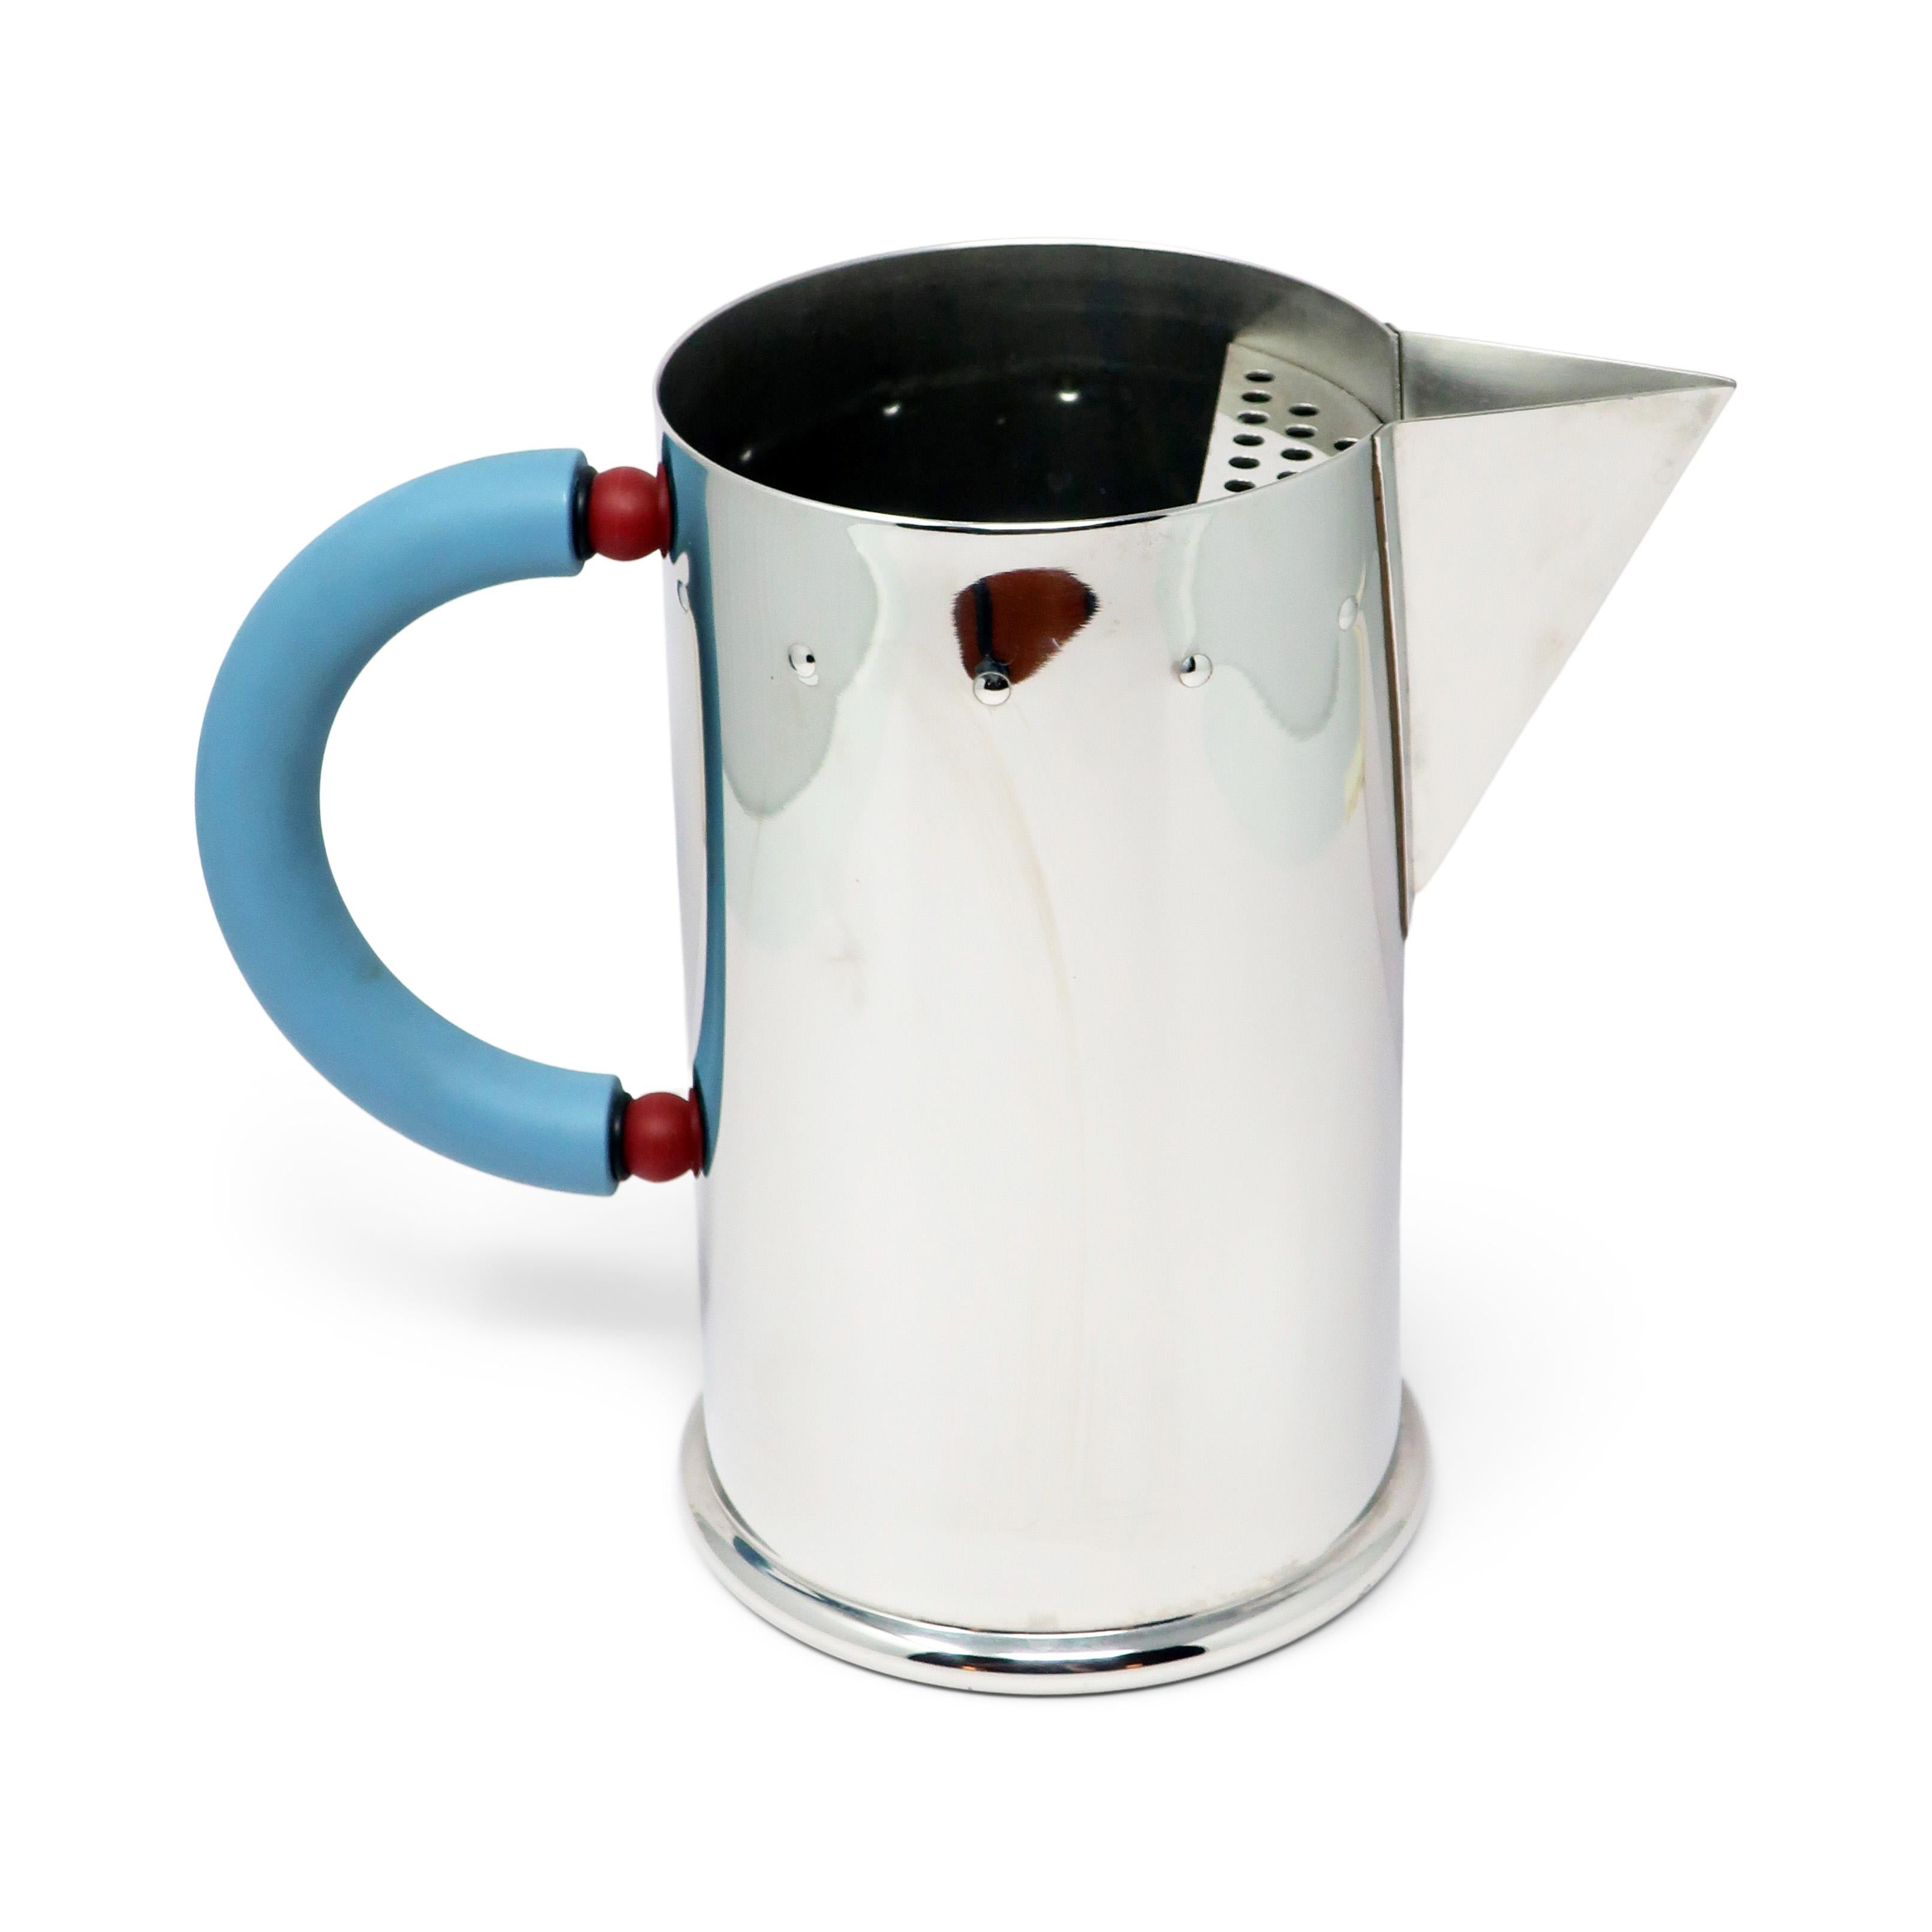 20th Century Stainless Pitcher, Creamer and Sugar by Michael Graves for Alessi